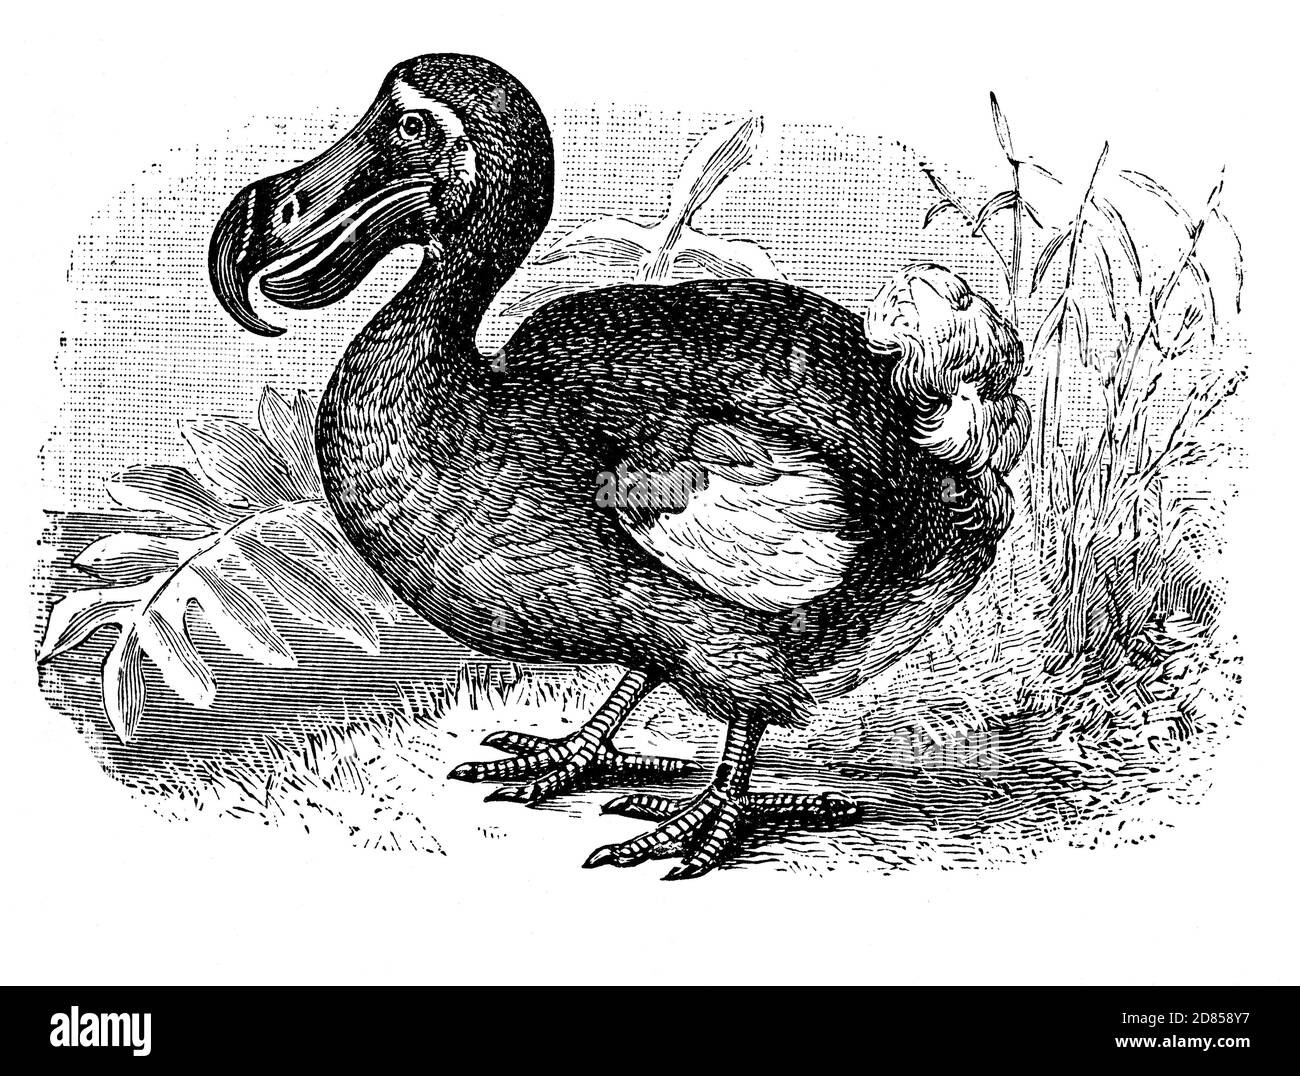 The dodo (Raphus cucullatus) is an extinct flightless bird about 1 metre (3 ft 3 in) tall, that was endemic to the island of Mauritius, east of Madagascar in the Indian Ocean. First recorded by Dutch sailors in 1598, during the following years, it was hunted by sailors and invasive species, while its habitat was being destroyed. The last widely accepted sighting of a dodo was in 1662. Stock Photo